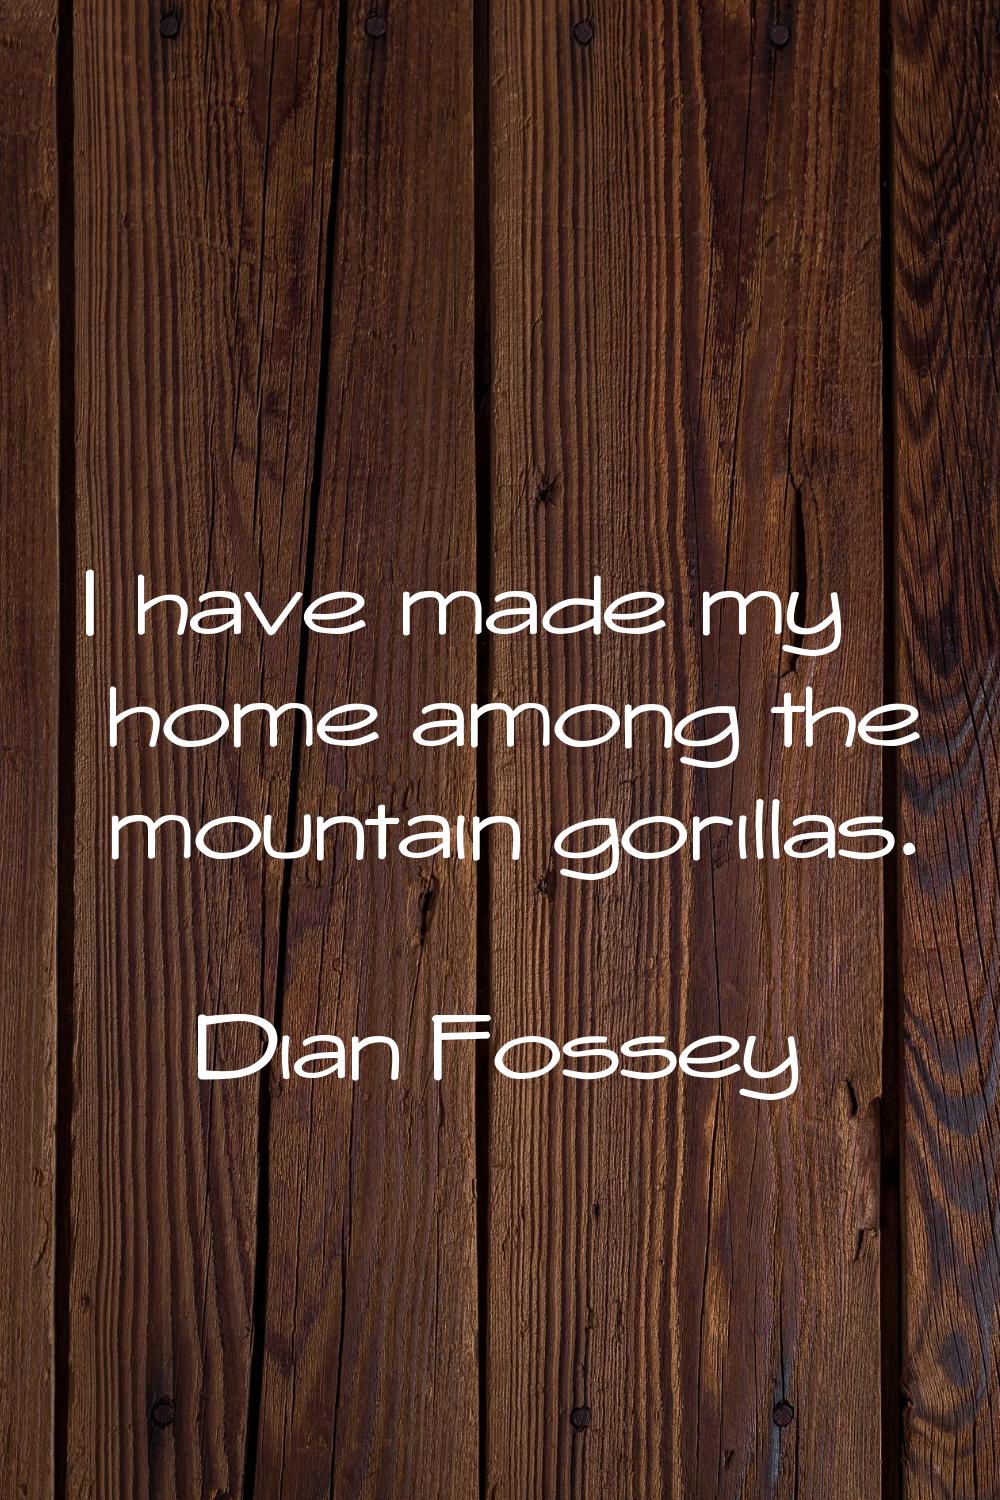 I have made my home among the mountain gorillas.